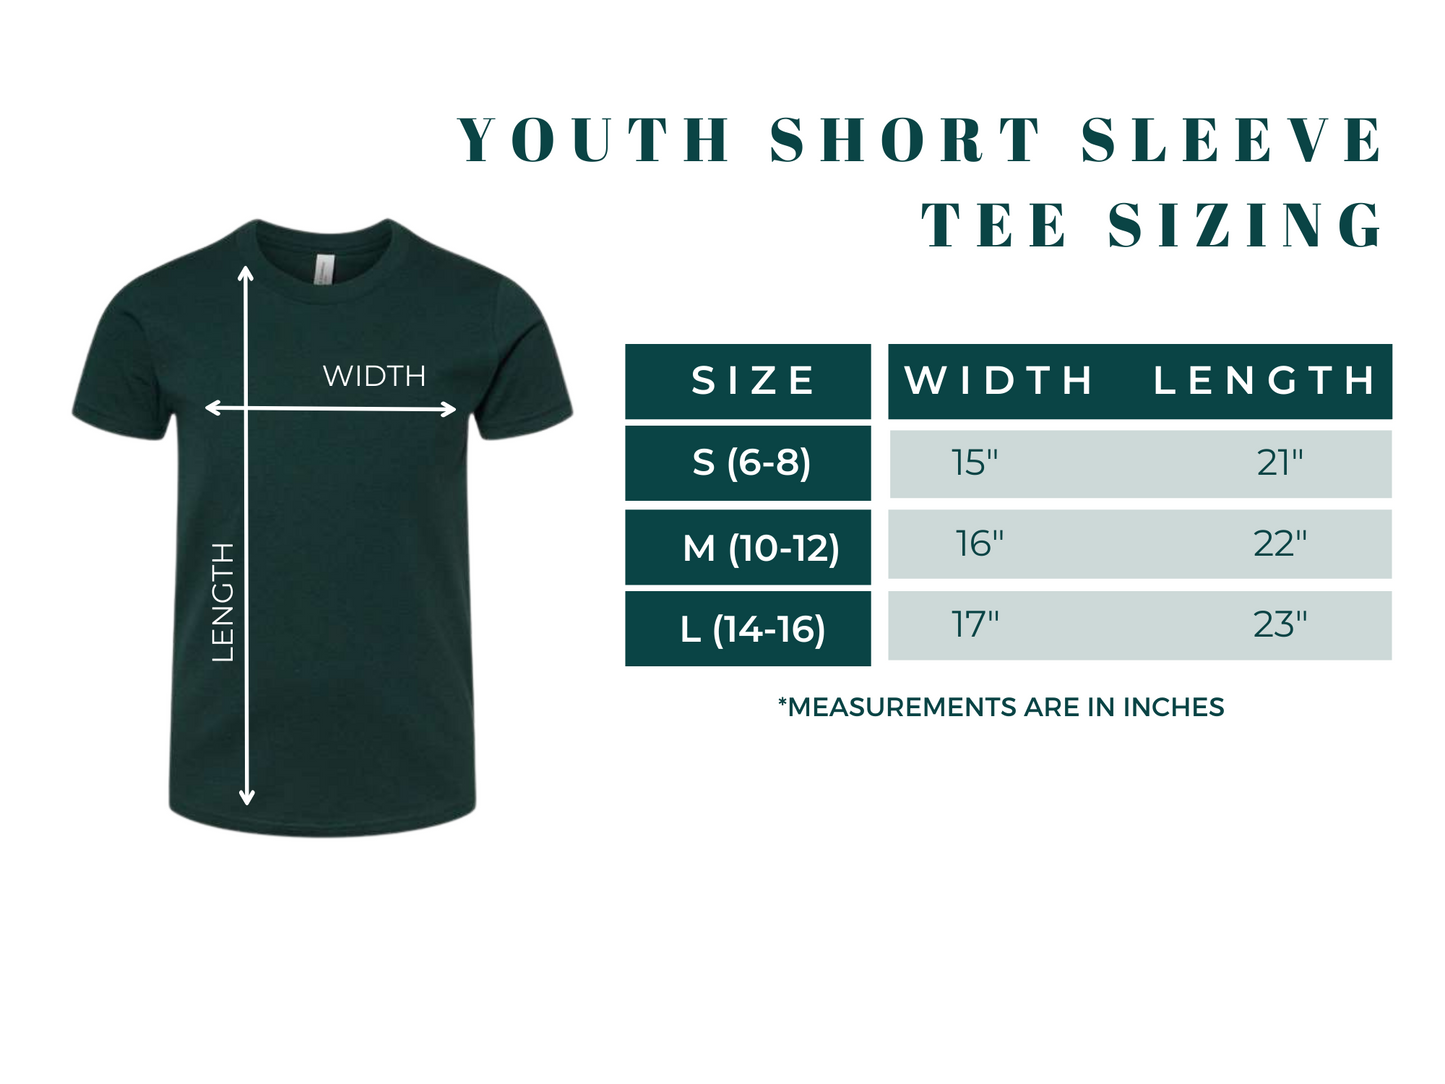 Sunkissed | Short Sleeve Youth Tee